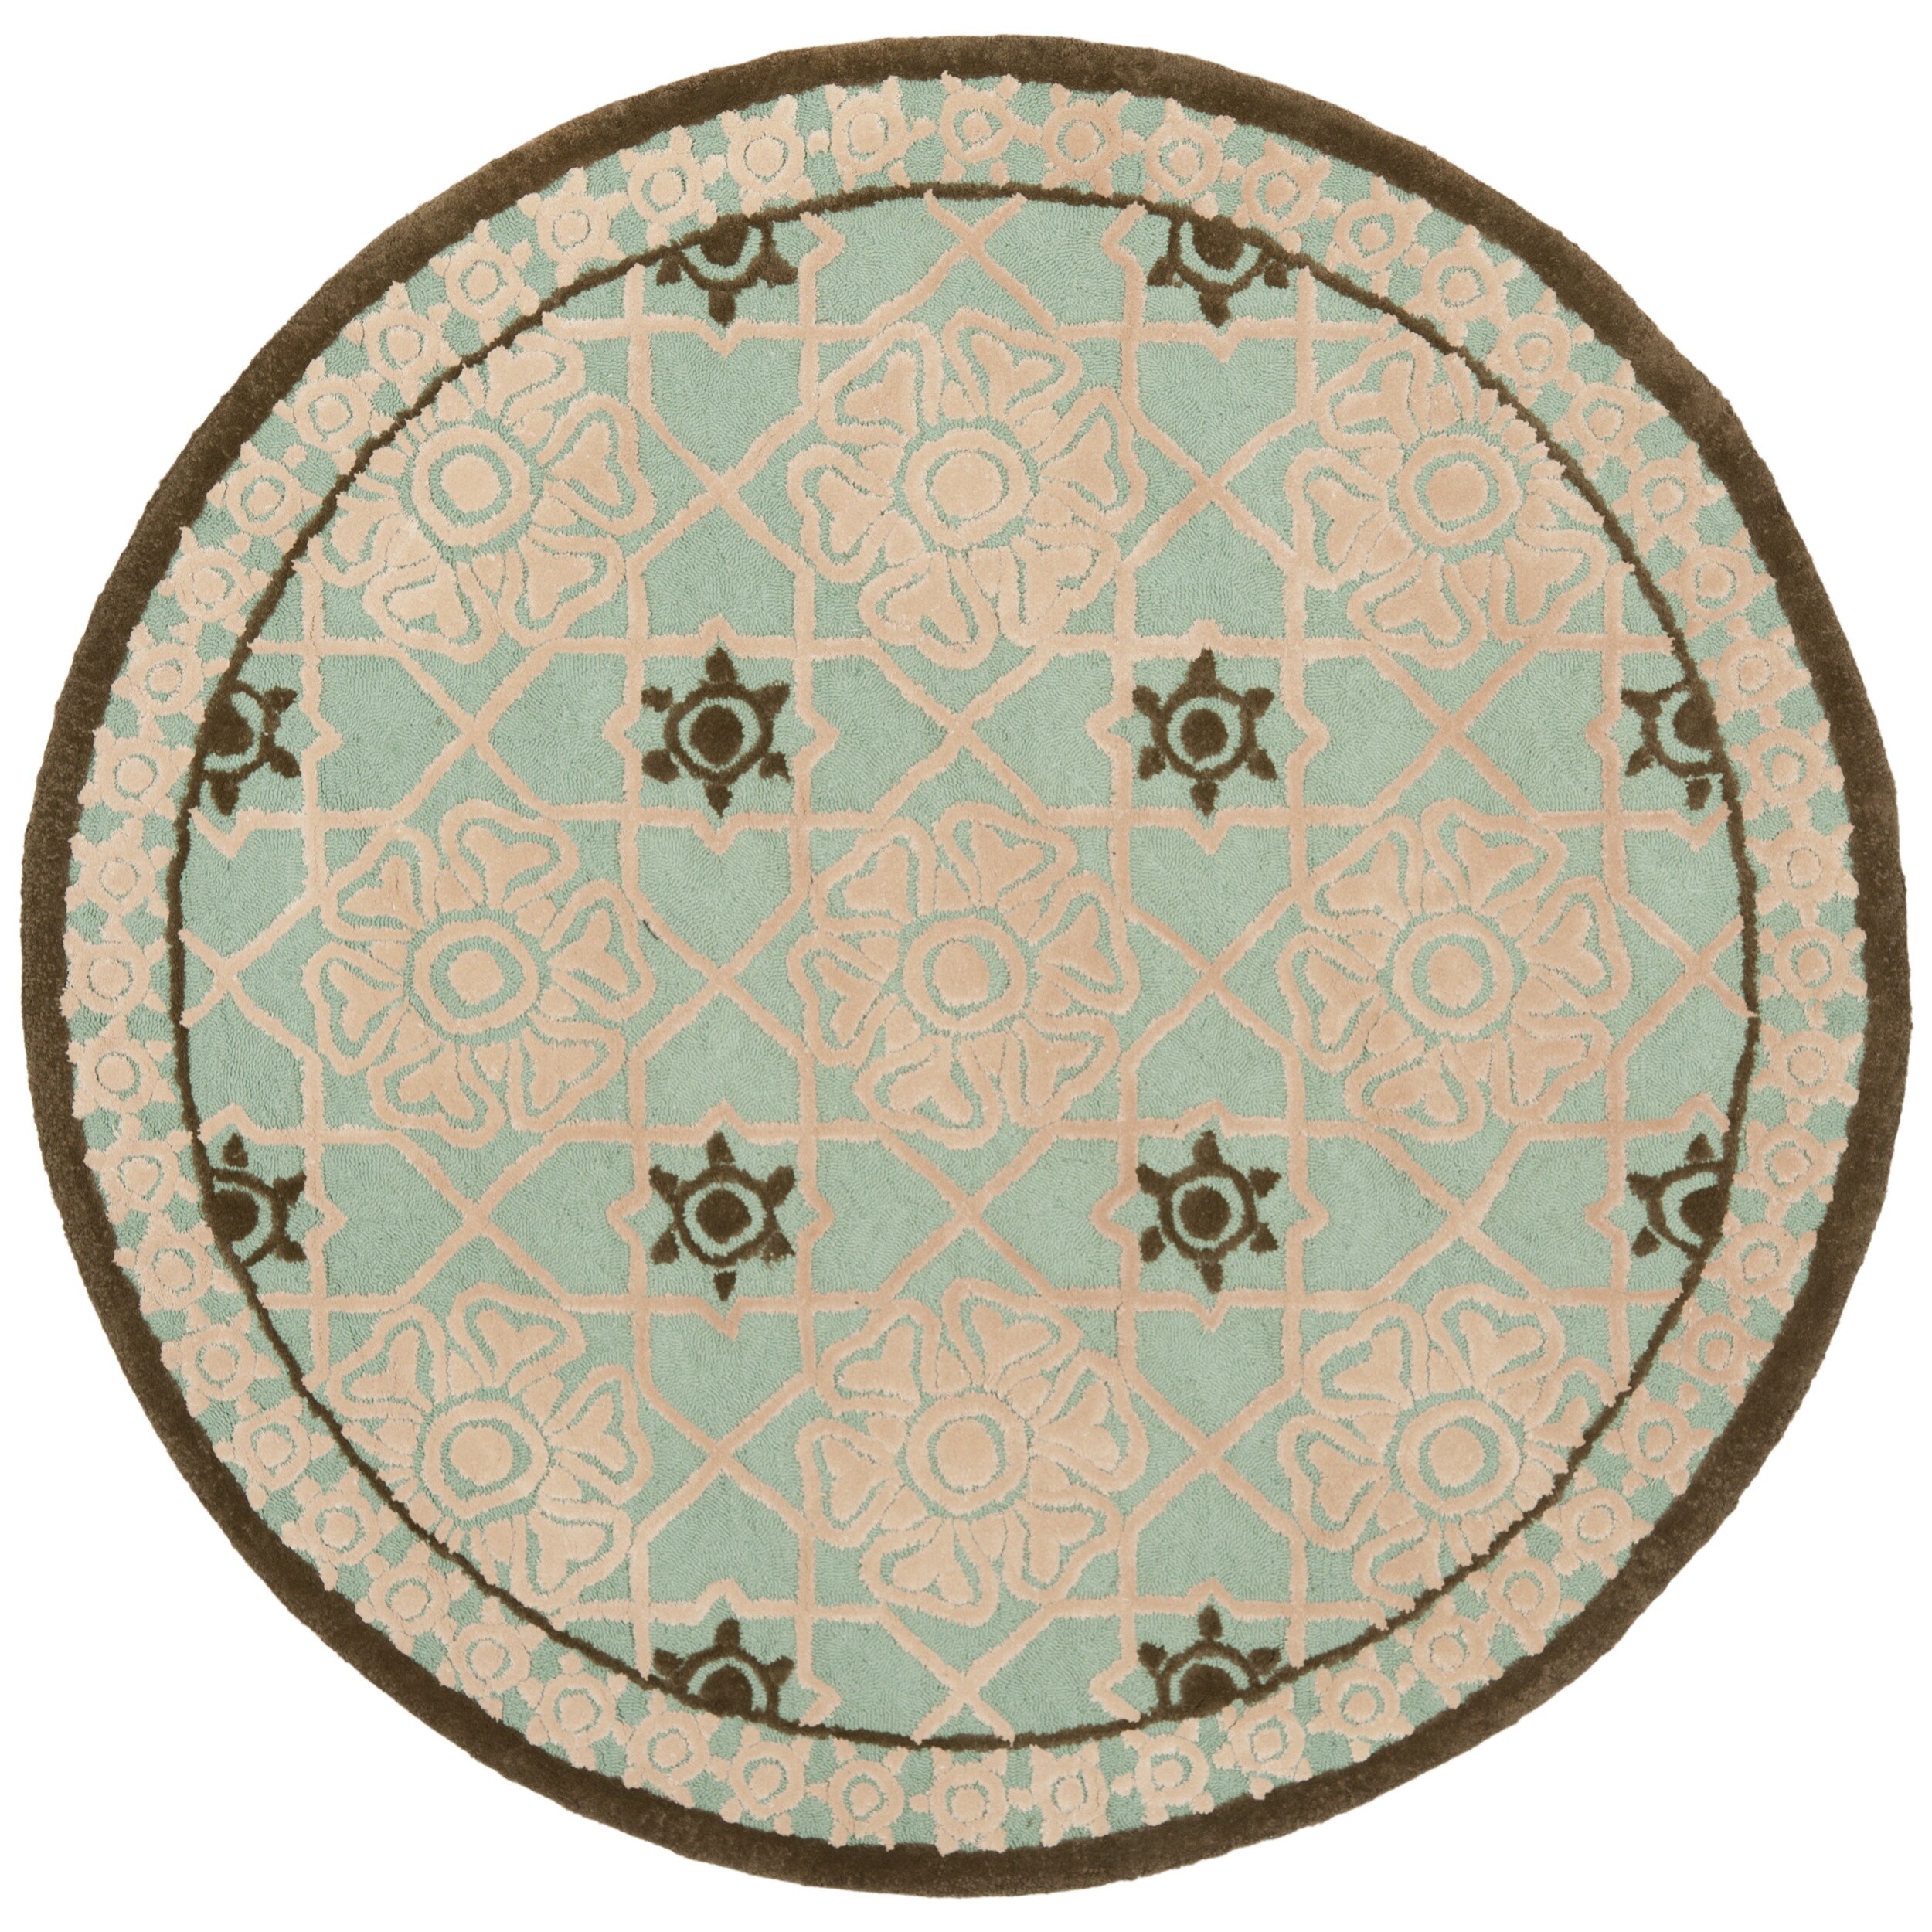 Safavieh Hand hooked Newport Teal/ Ivory Cotton Rug (4 X 4 Round)